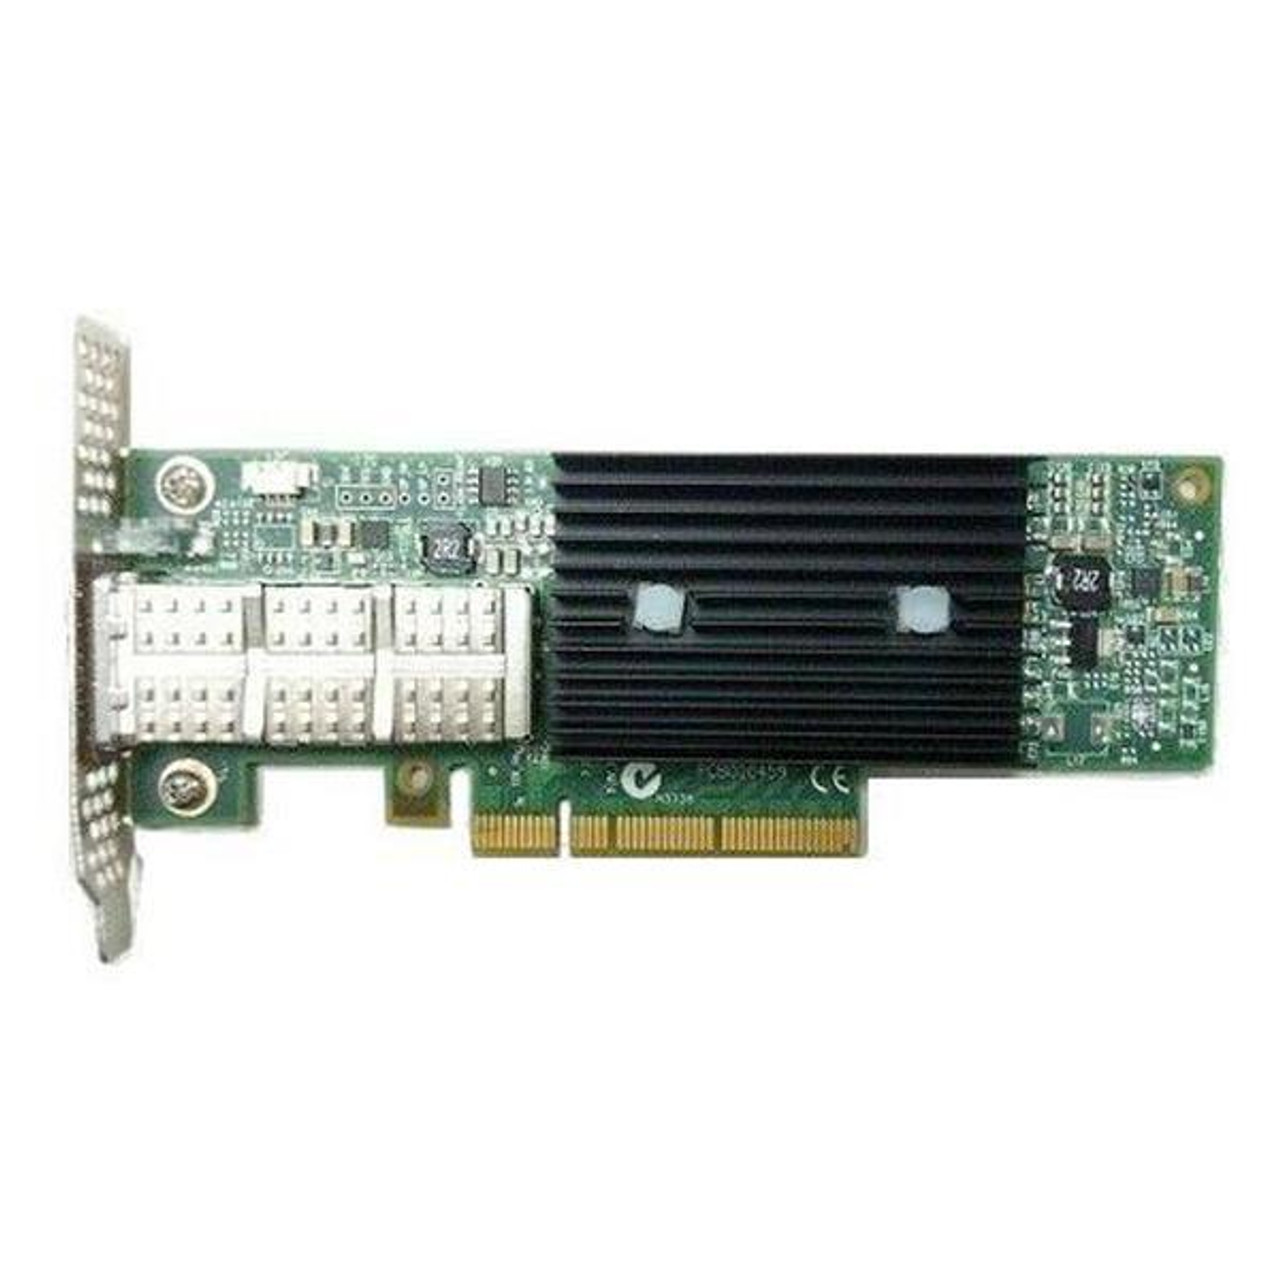 Related knowledge about network cards